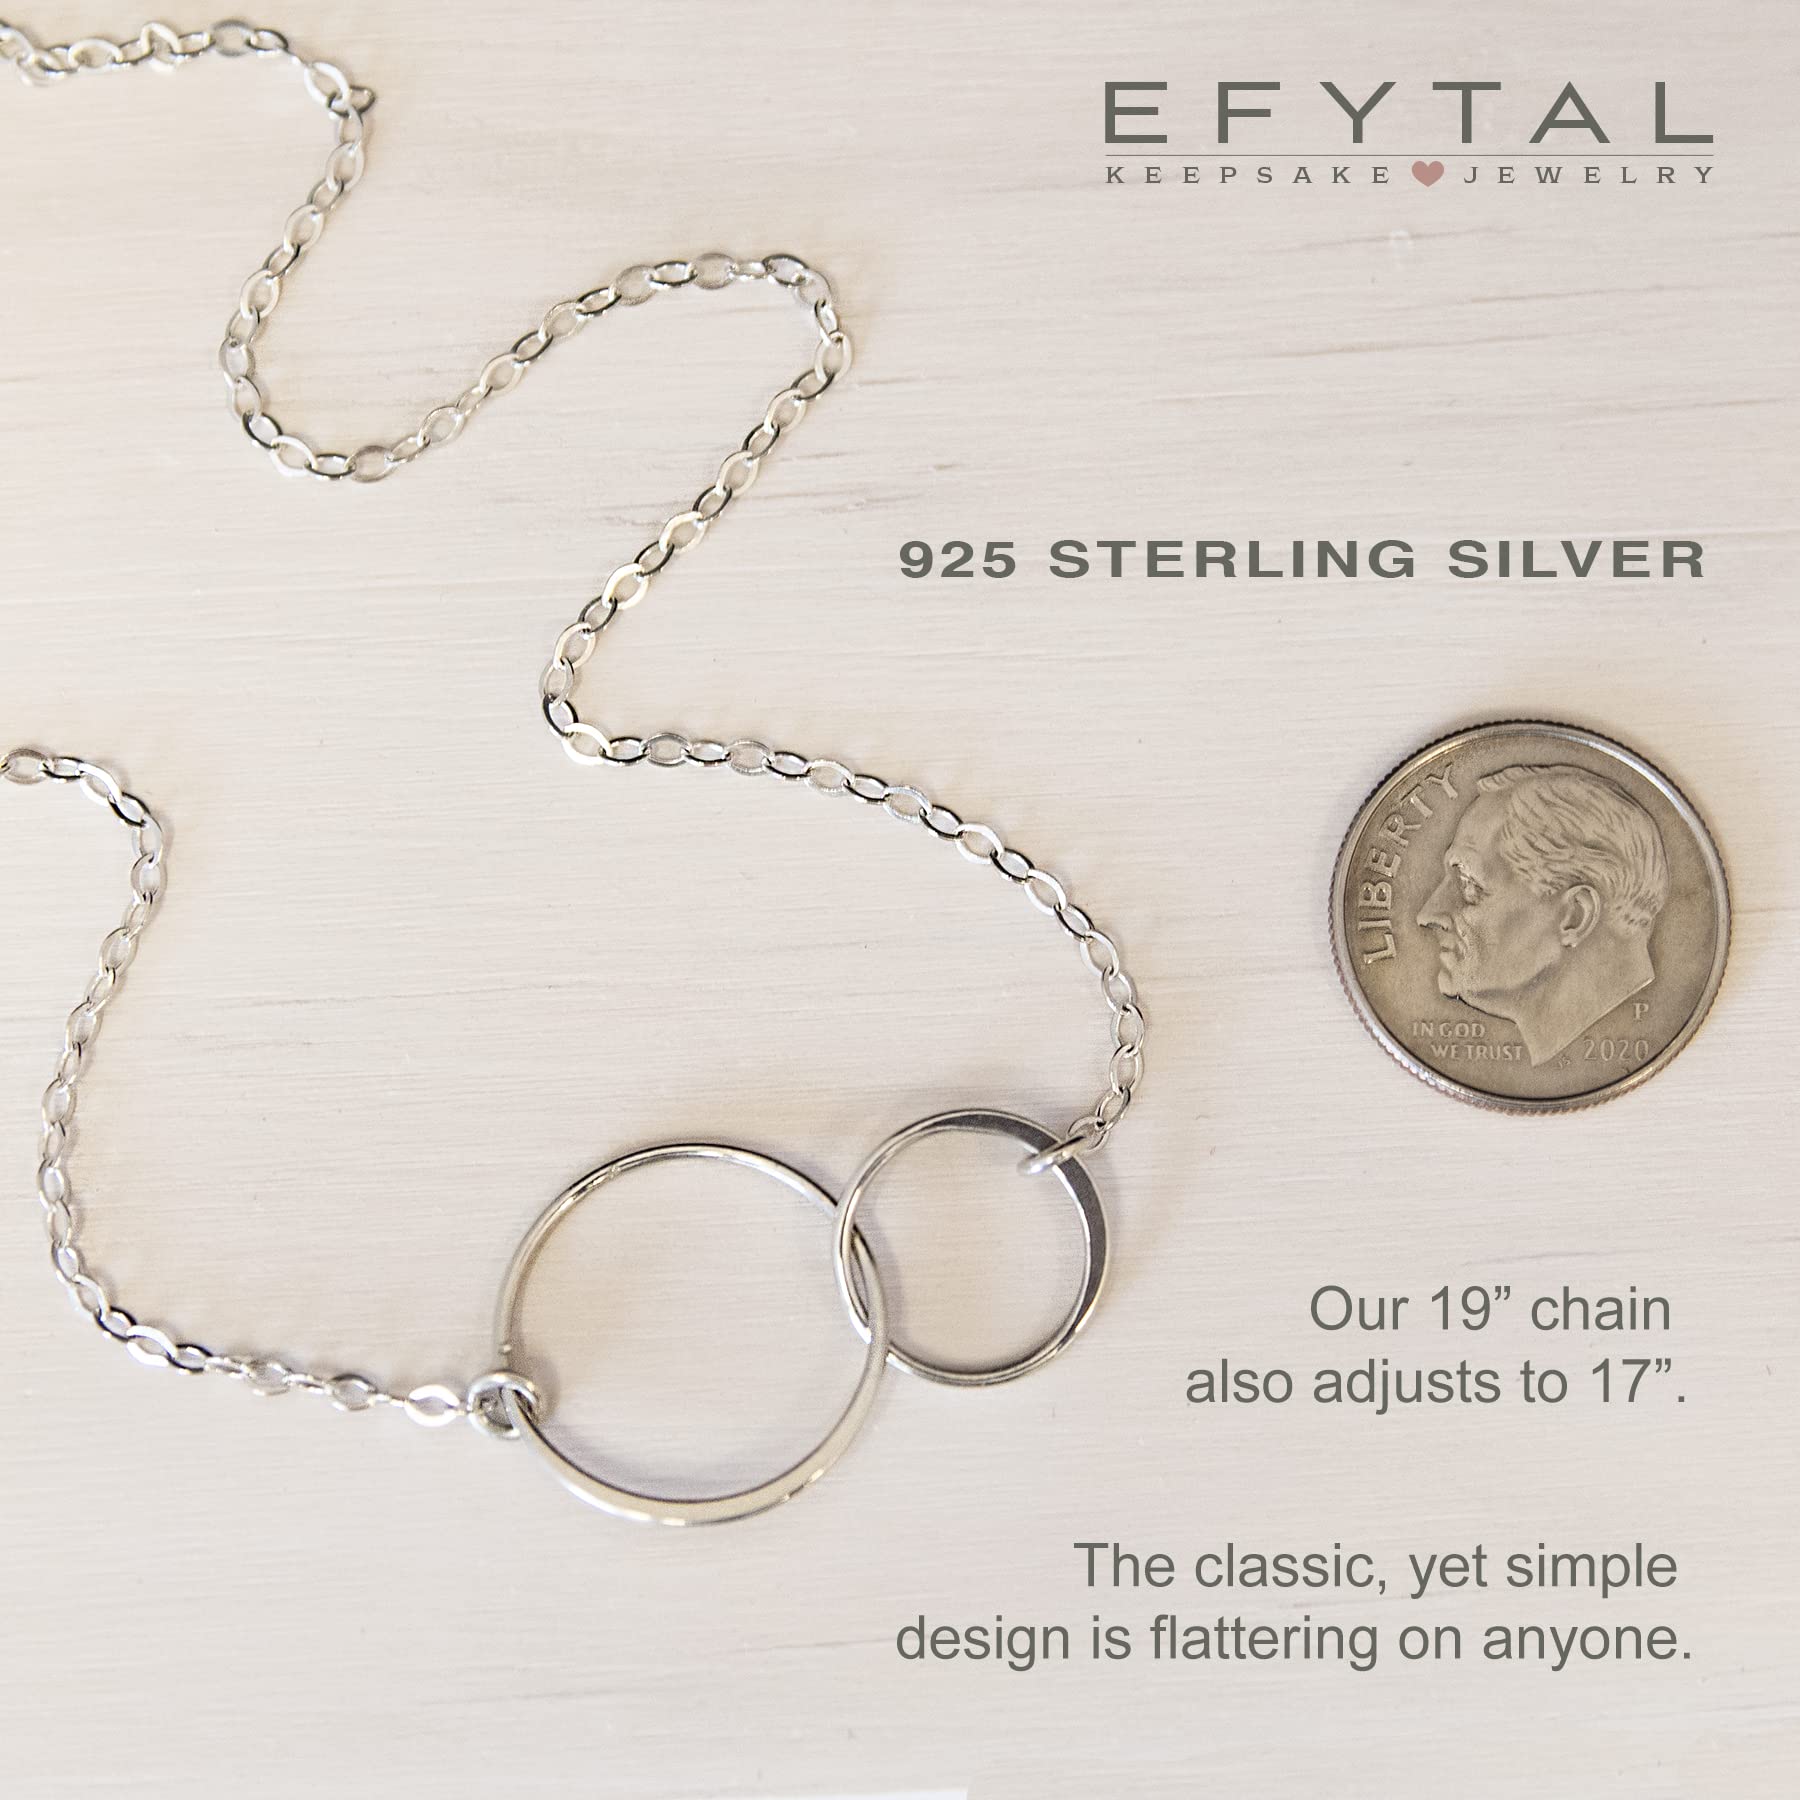 EFYTAL Friend Gifts, 925 Sterling Silver Friendship for Eternity Necklace, Two Interlocking Infinity Circles Gift For Best Friend, Birthday Gift Ideas